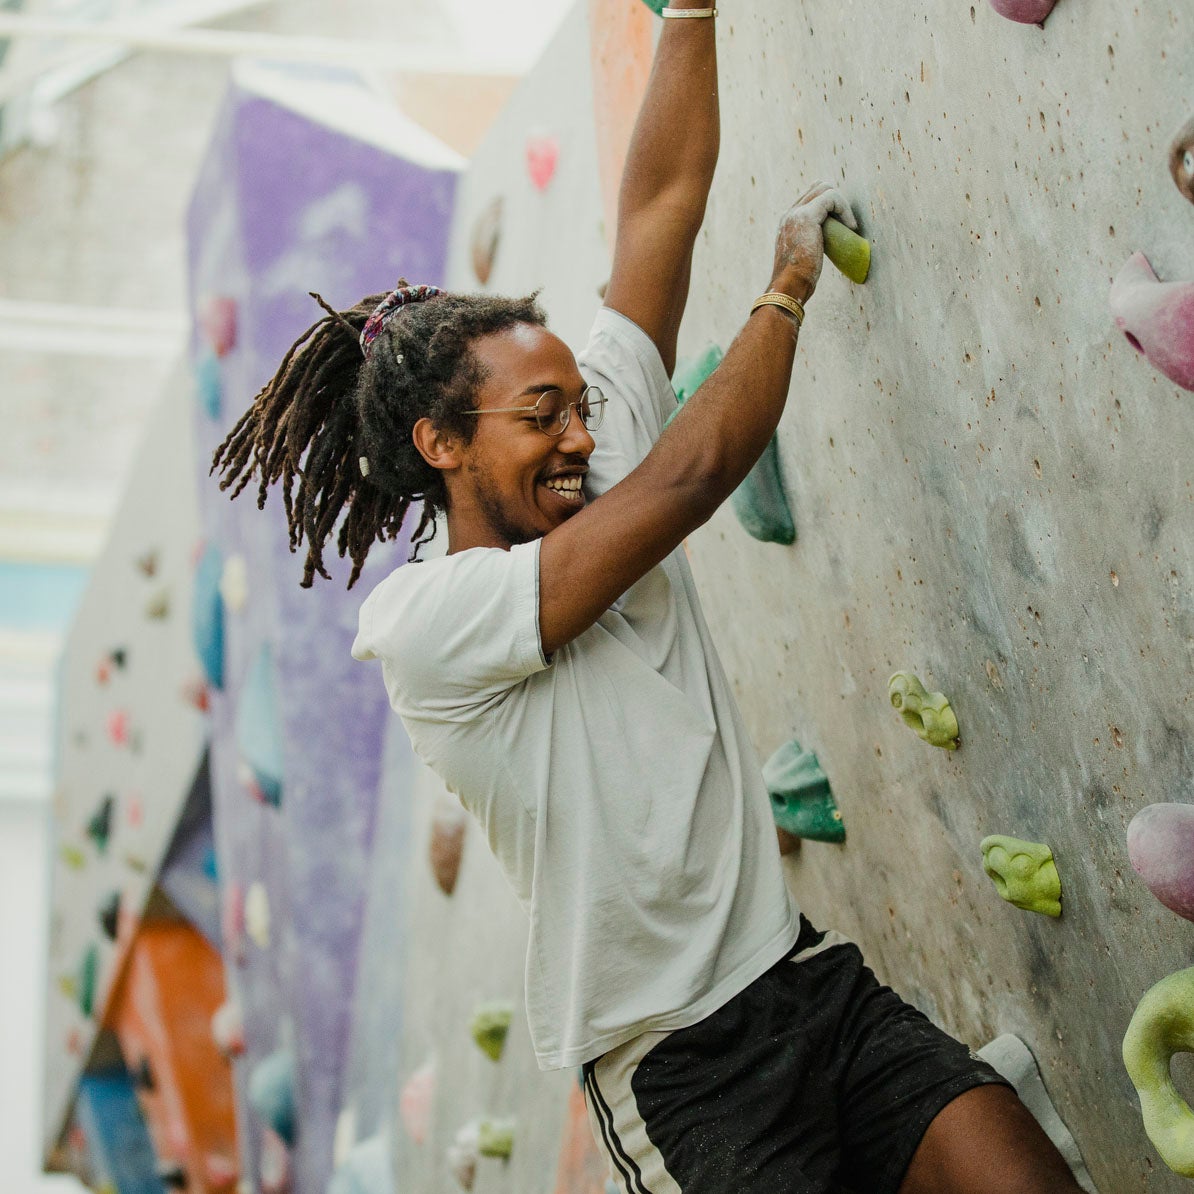 New York City Climbers Are Selling NFTs to Finance a New Gym